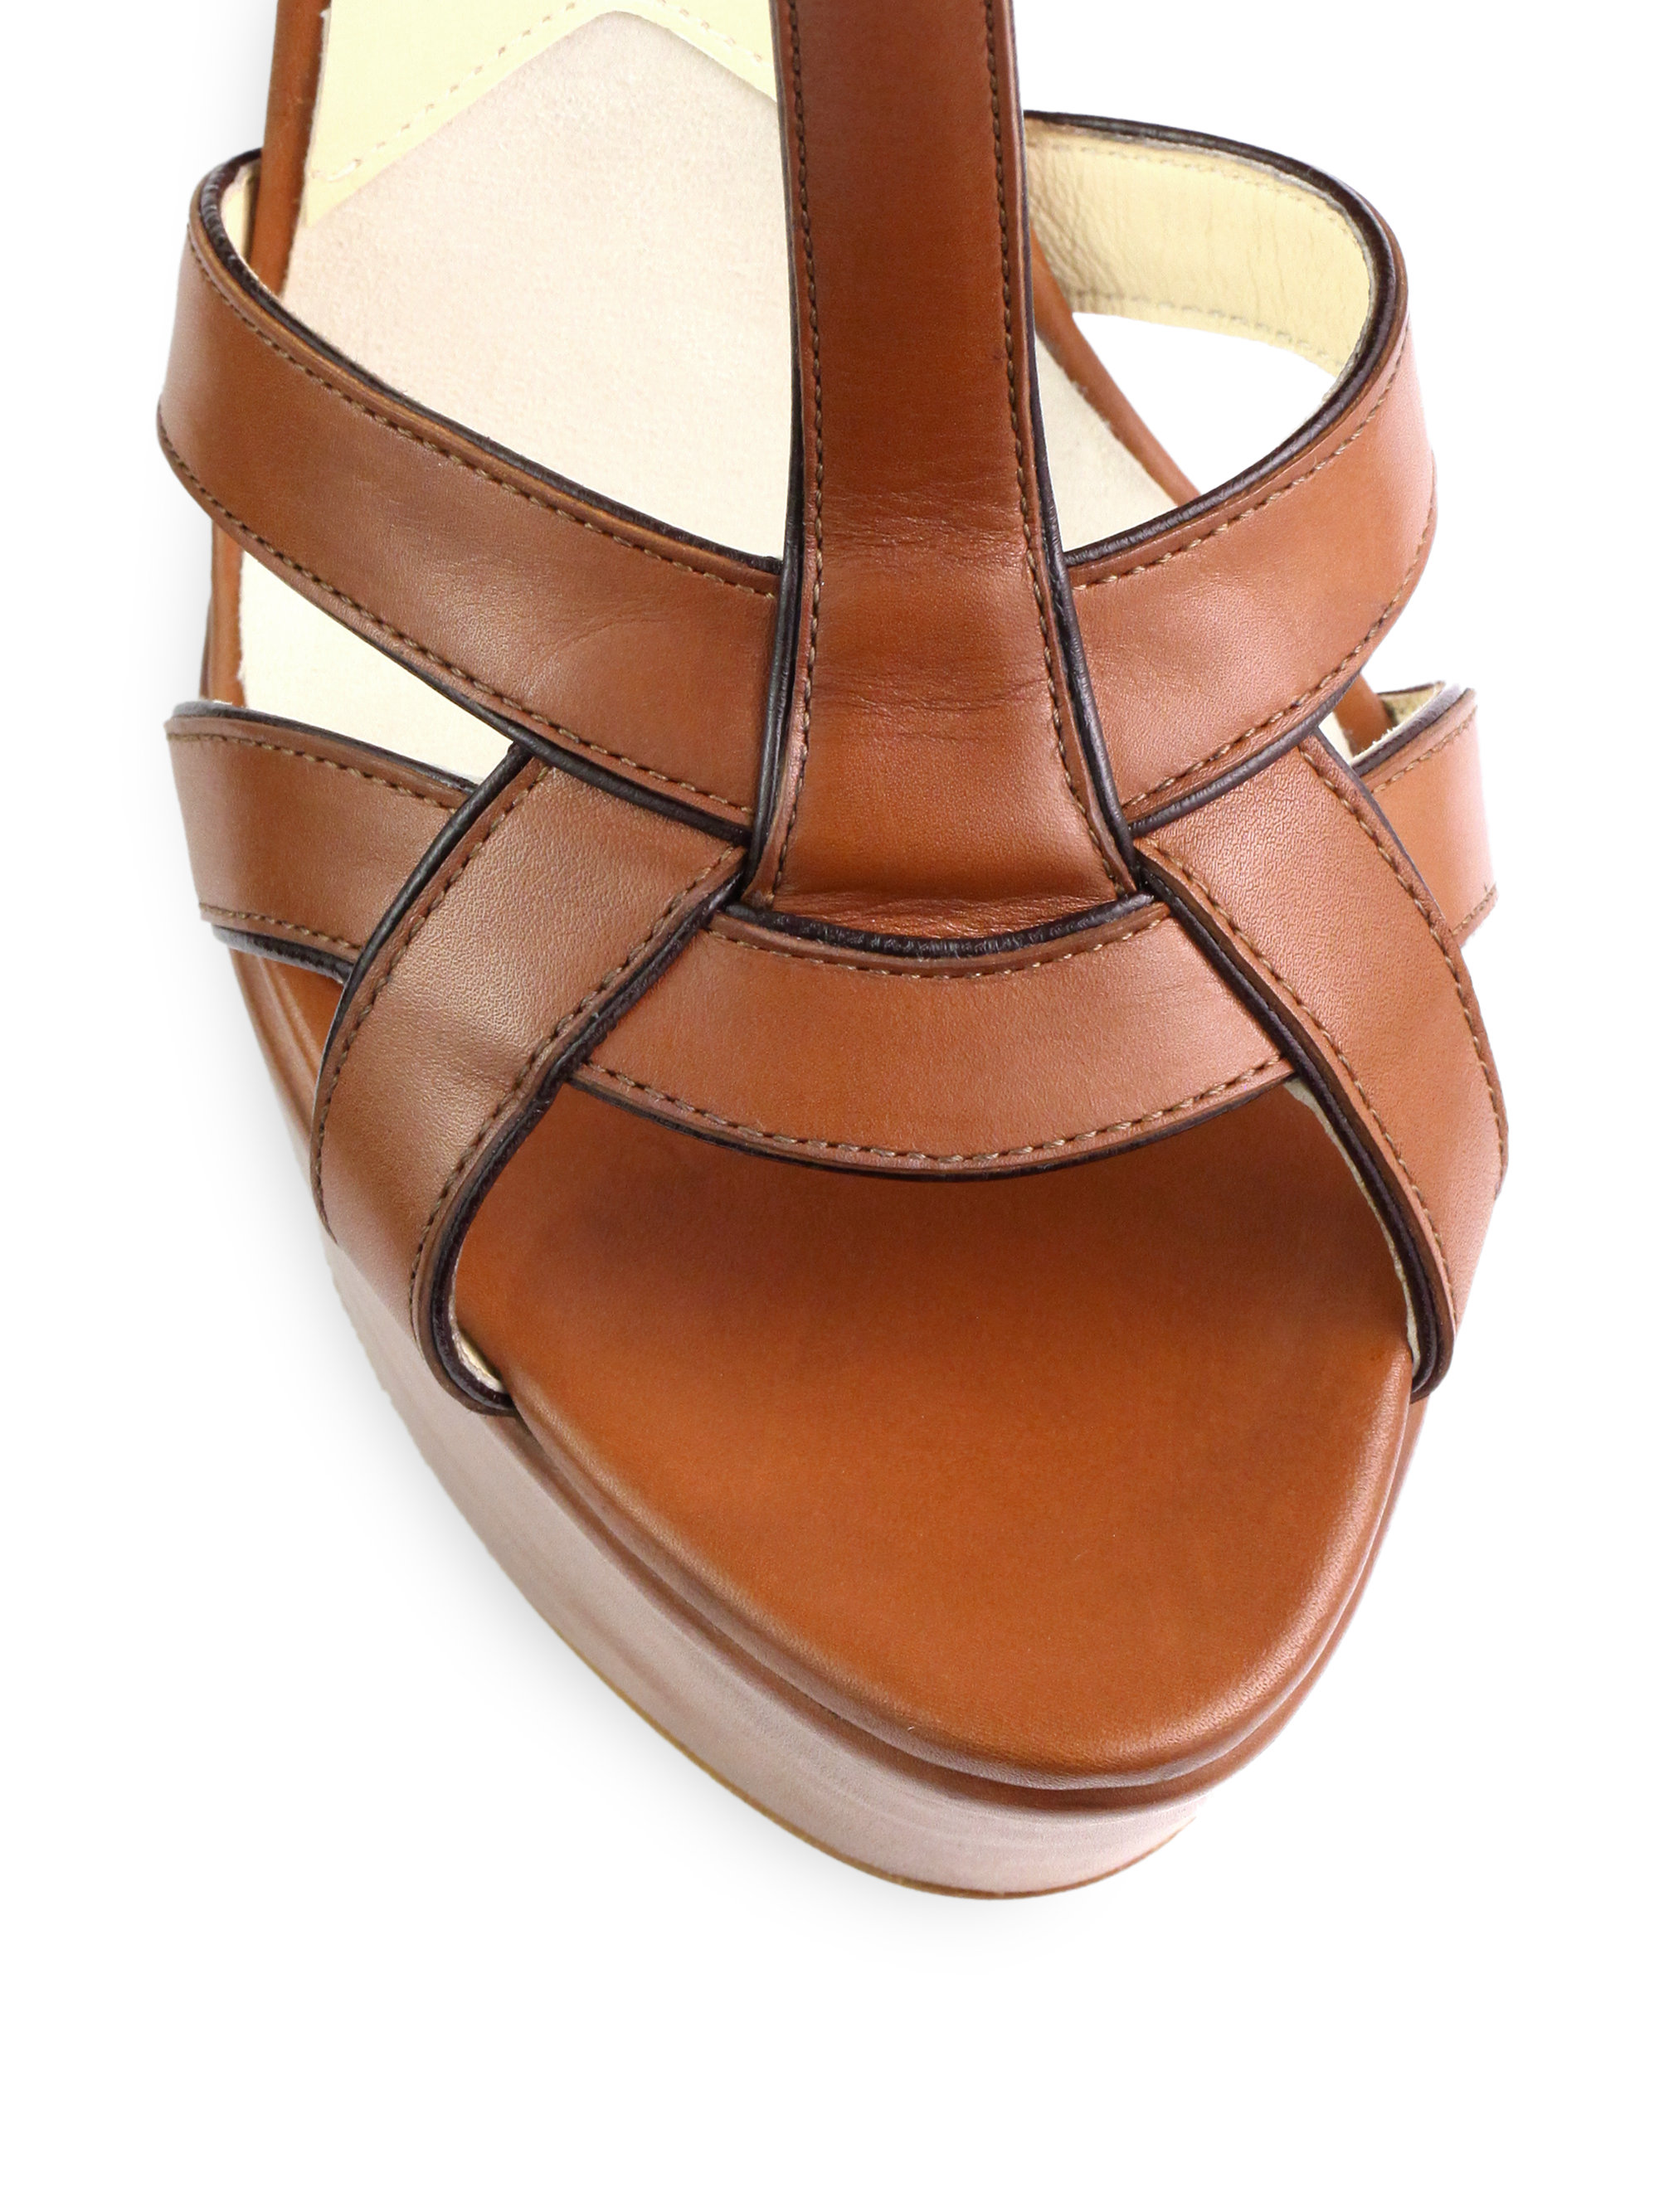 Lyst - Brian Atwood Sema Leather Wedge Sandals in Brown